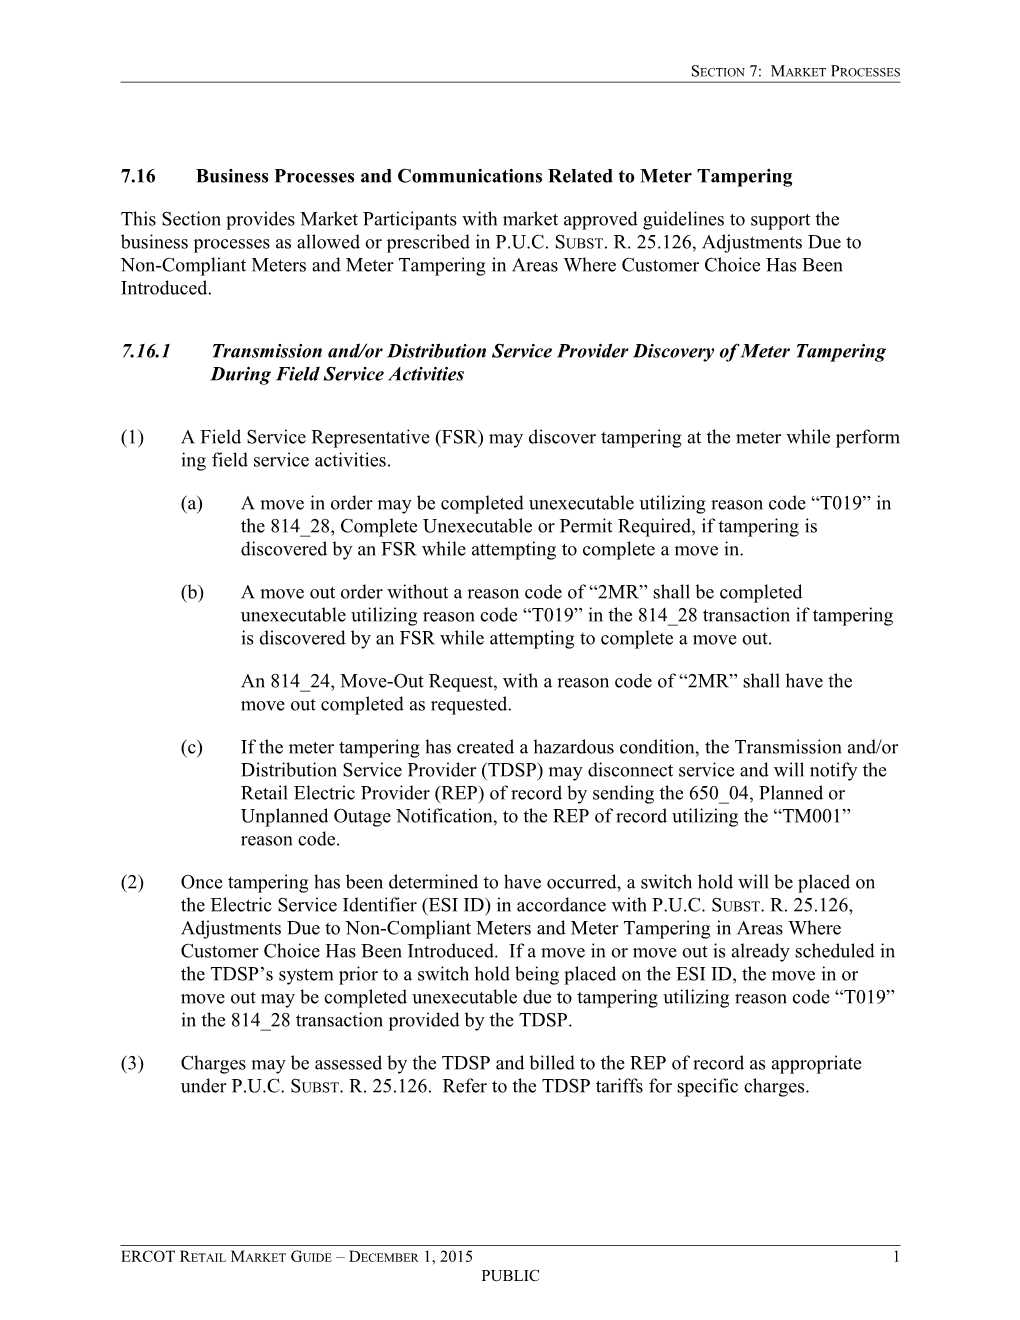 7.16 Business Processes and Communications Related to Meter Tampering